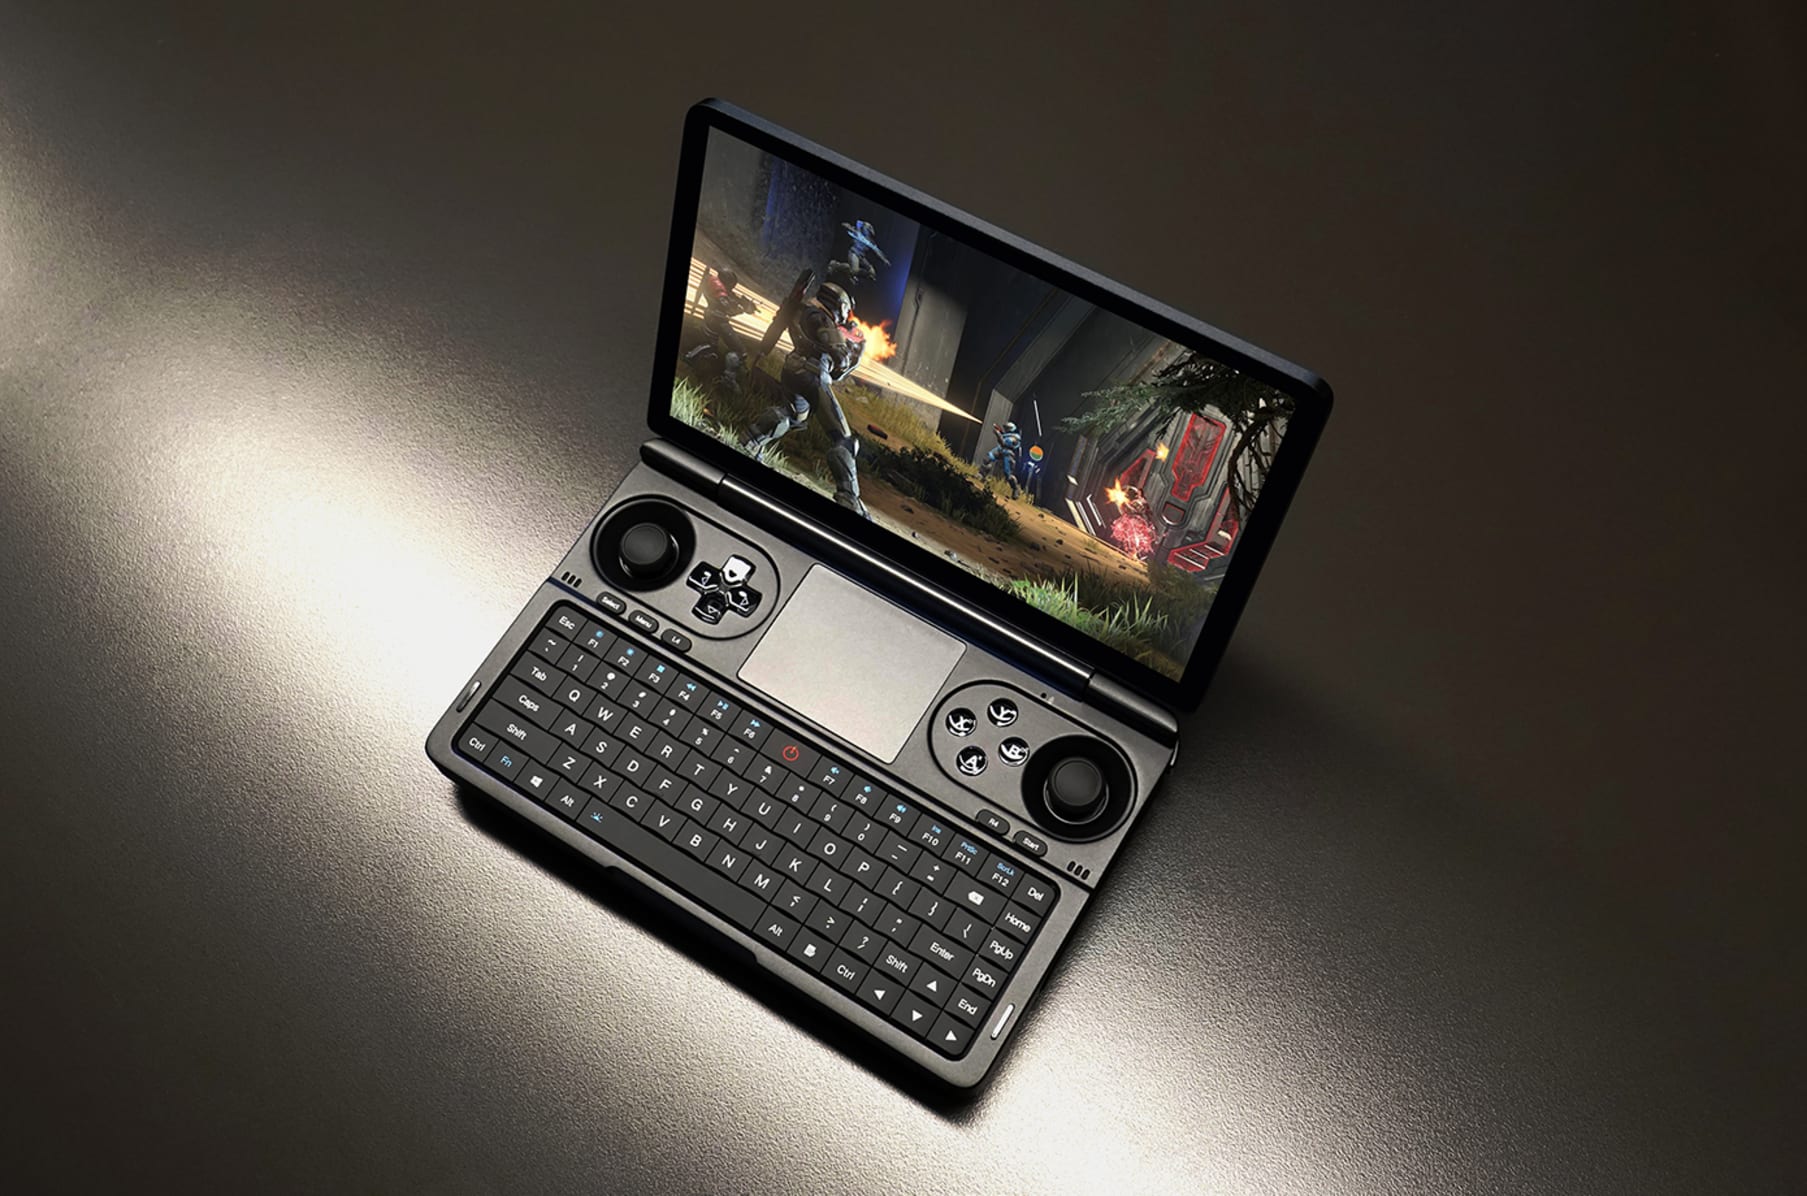 GPD Win Mini will be a small(ish) handheld gaming PC with a